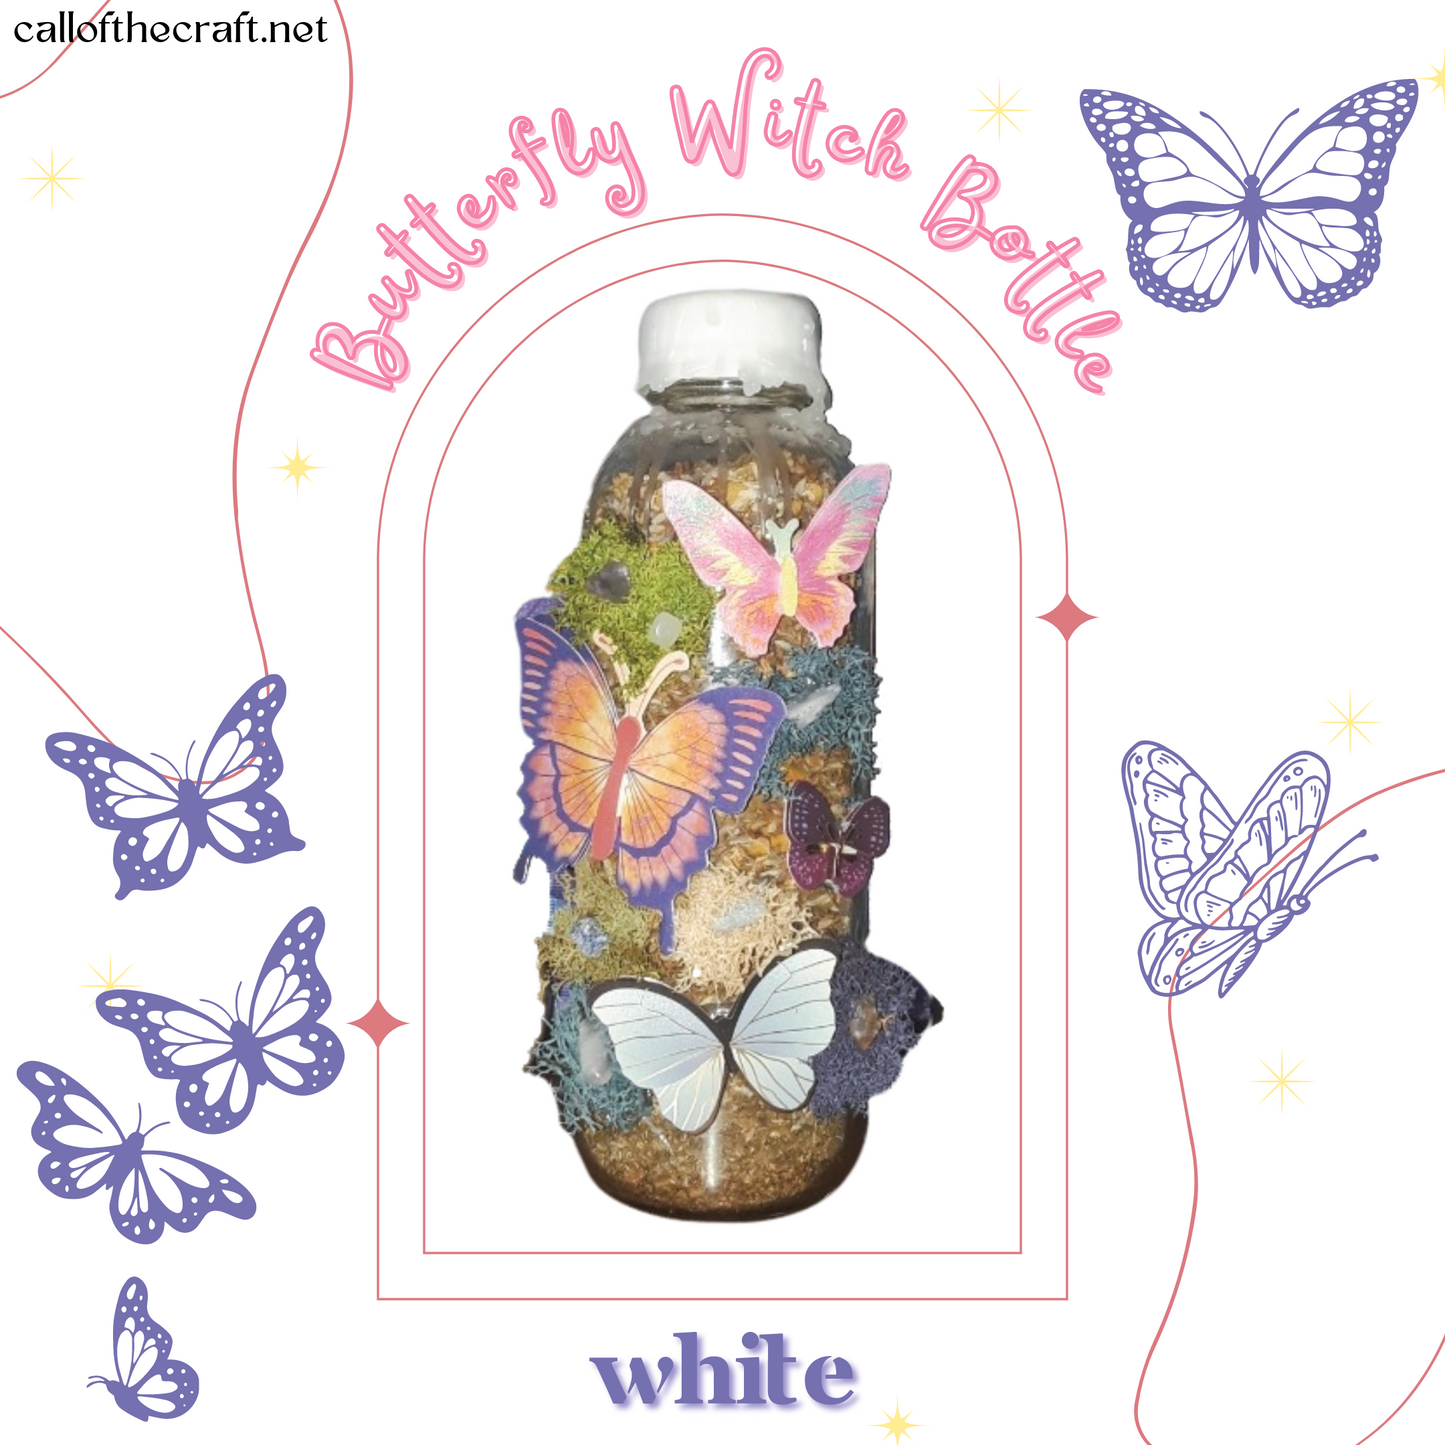 Butterfly Witch Bottles, White - The Call of the Craft